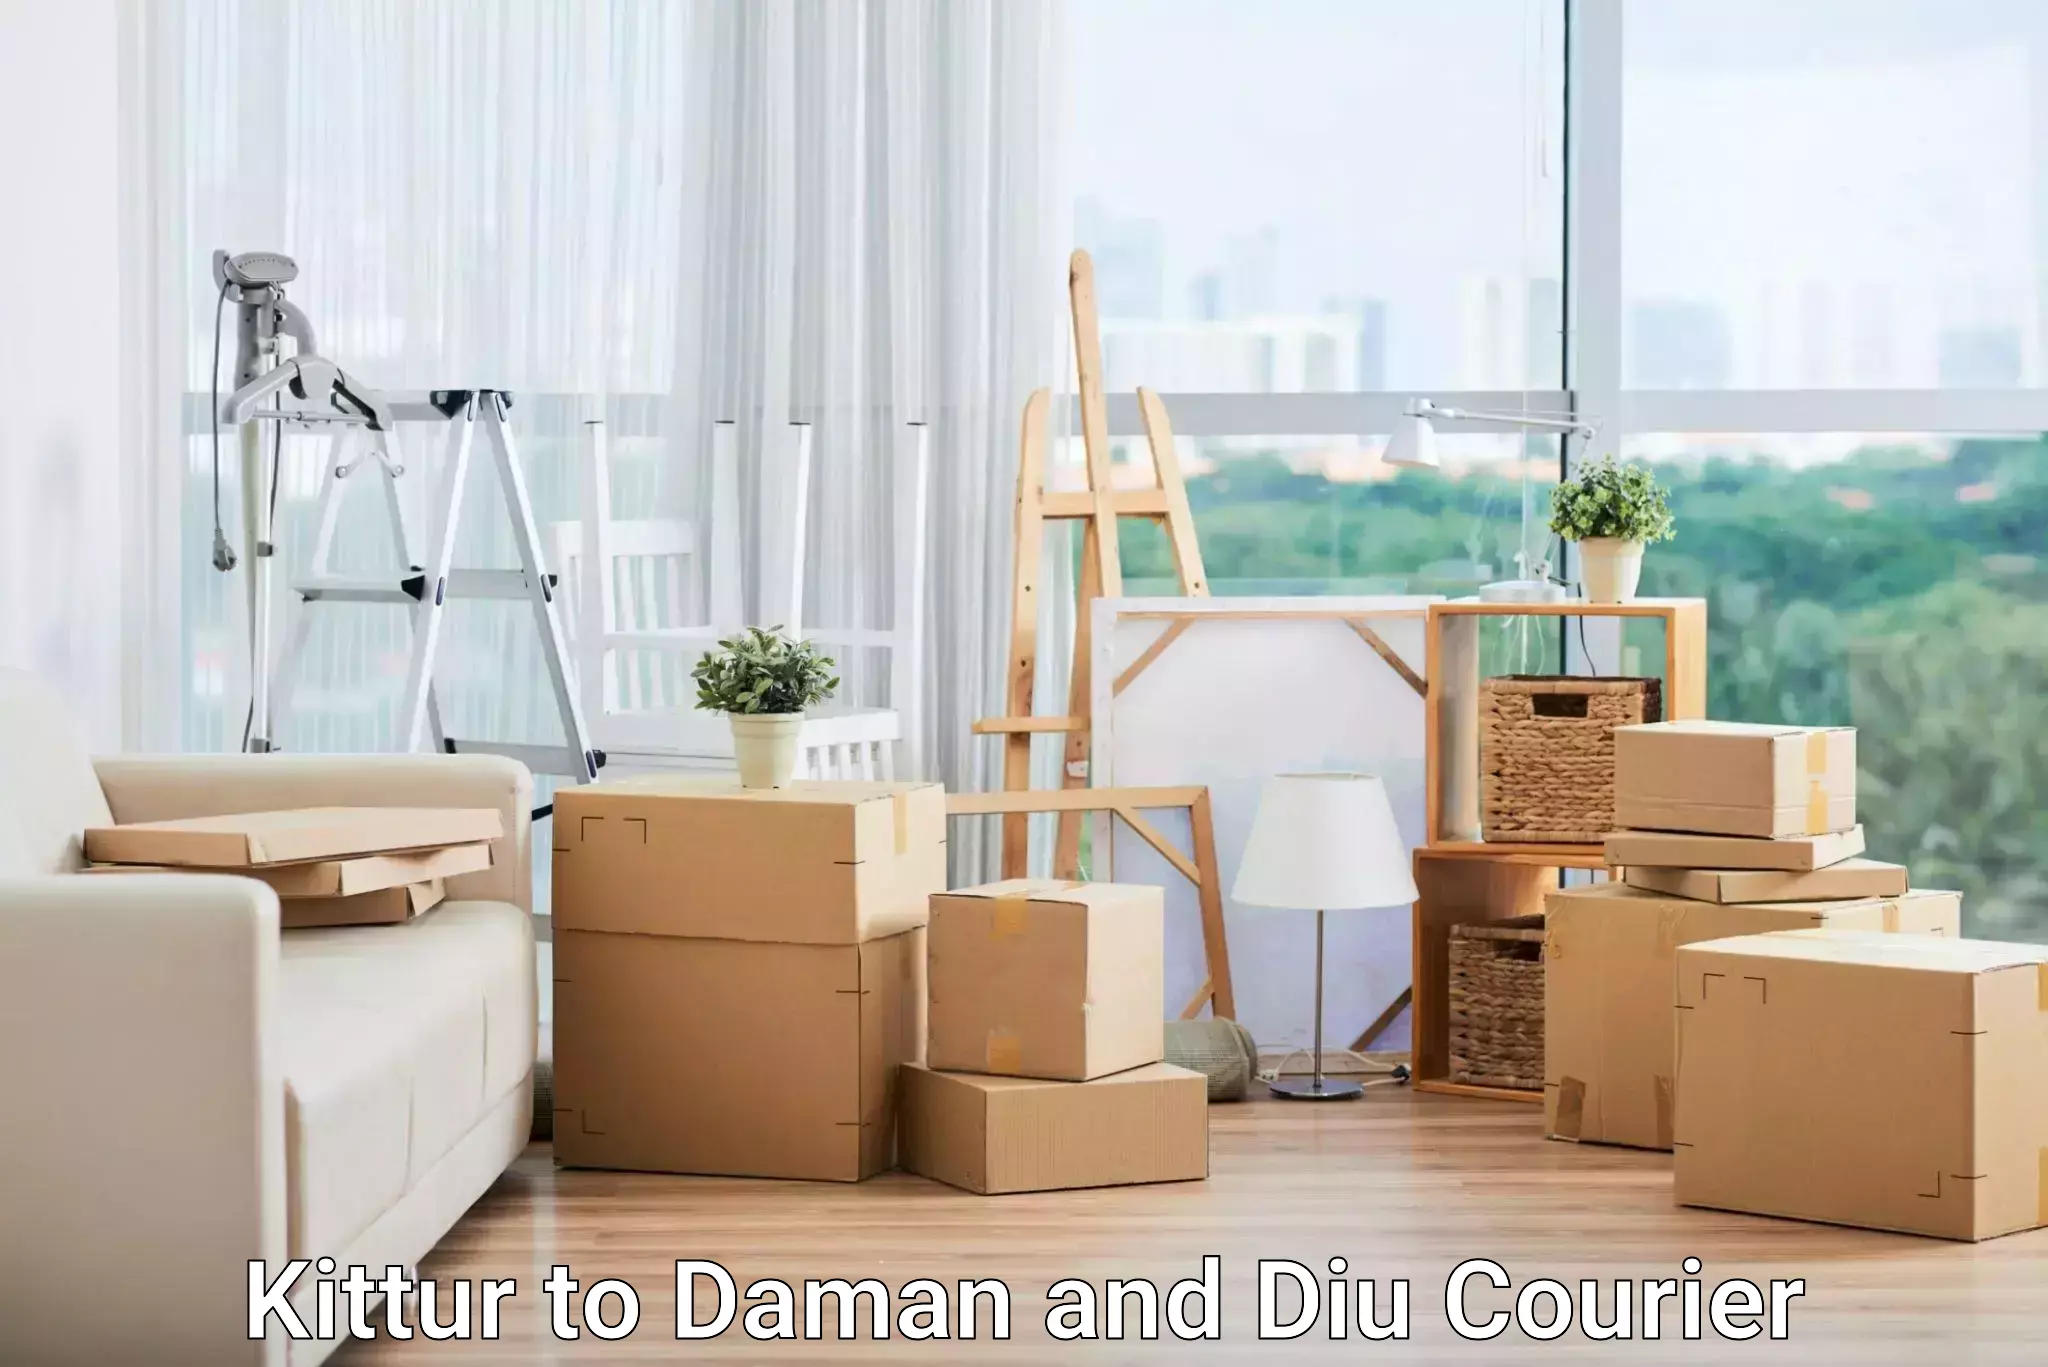 Package delivery network Kittur to Daman